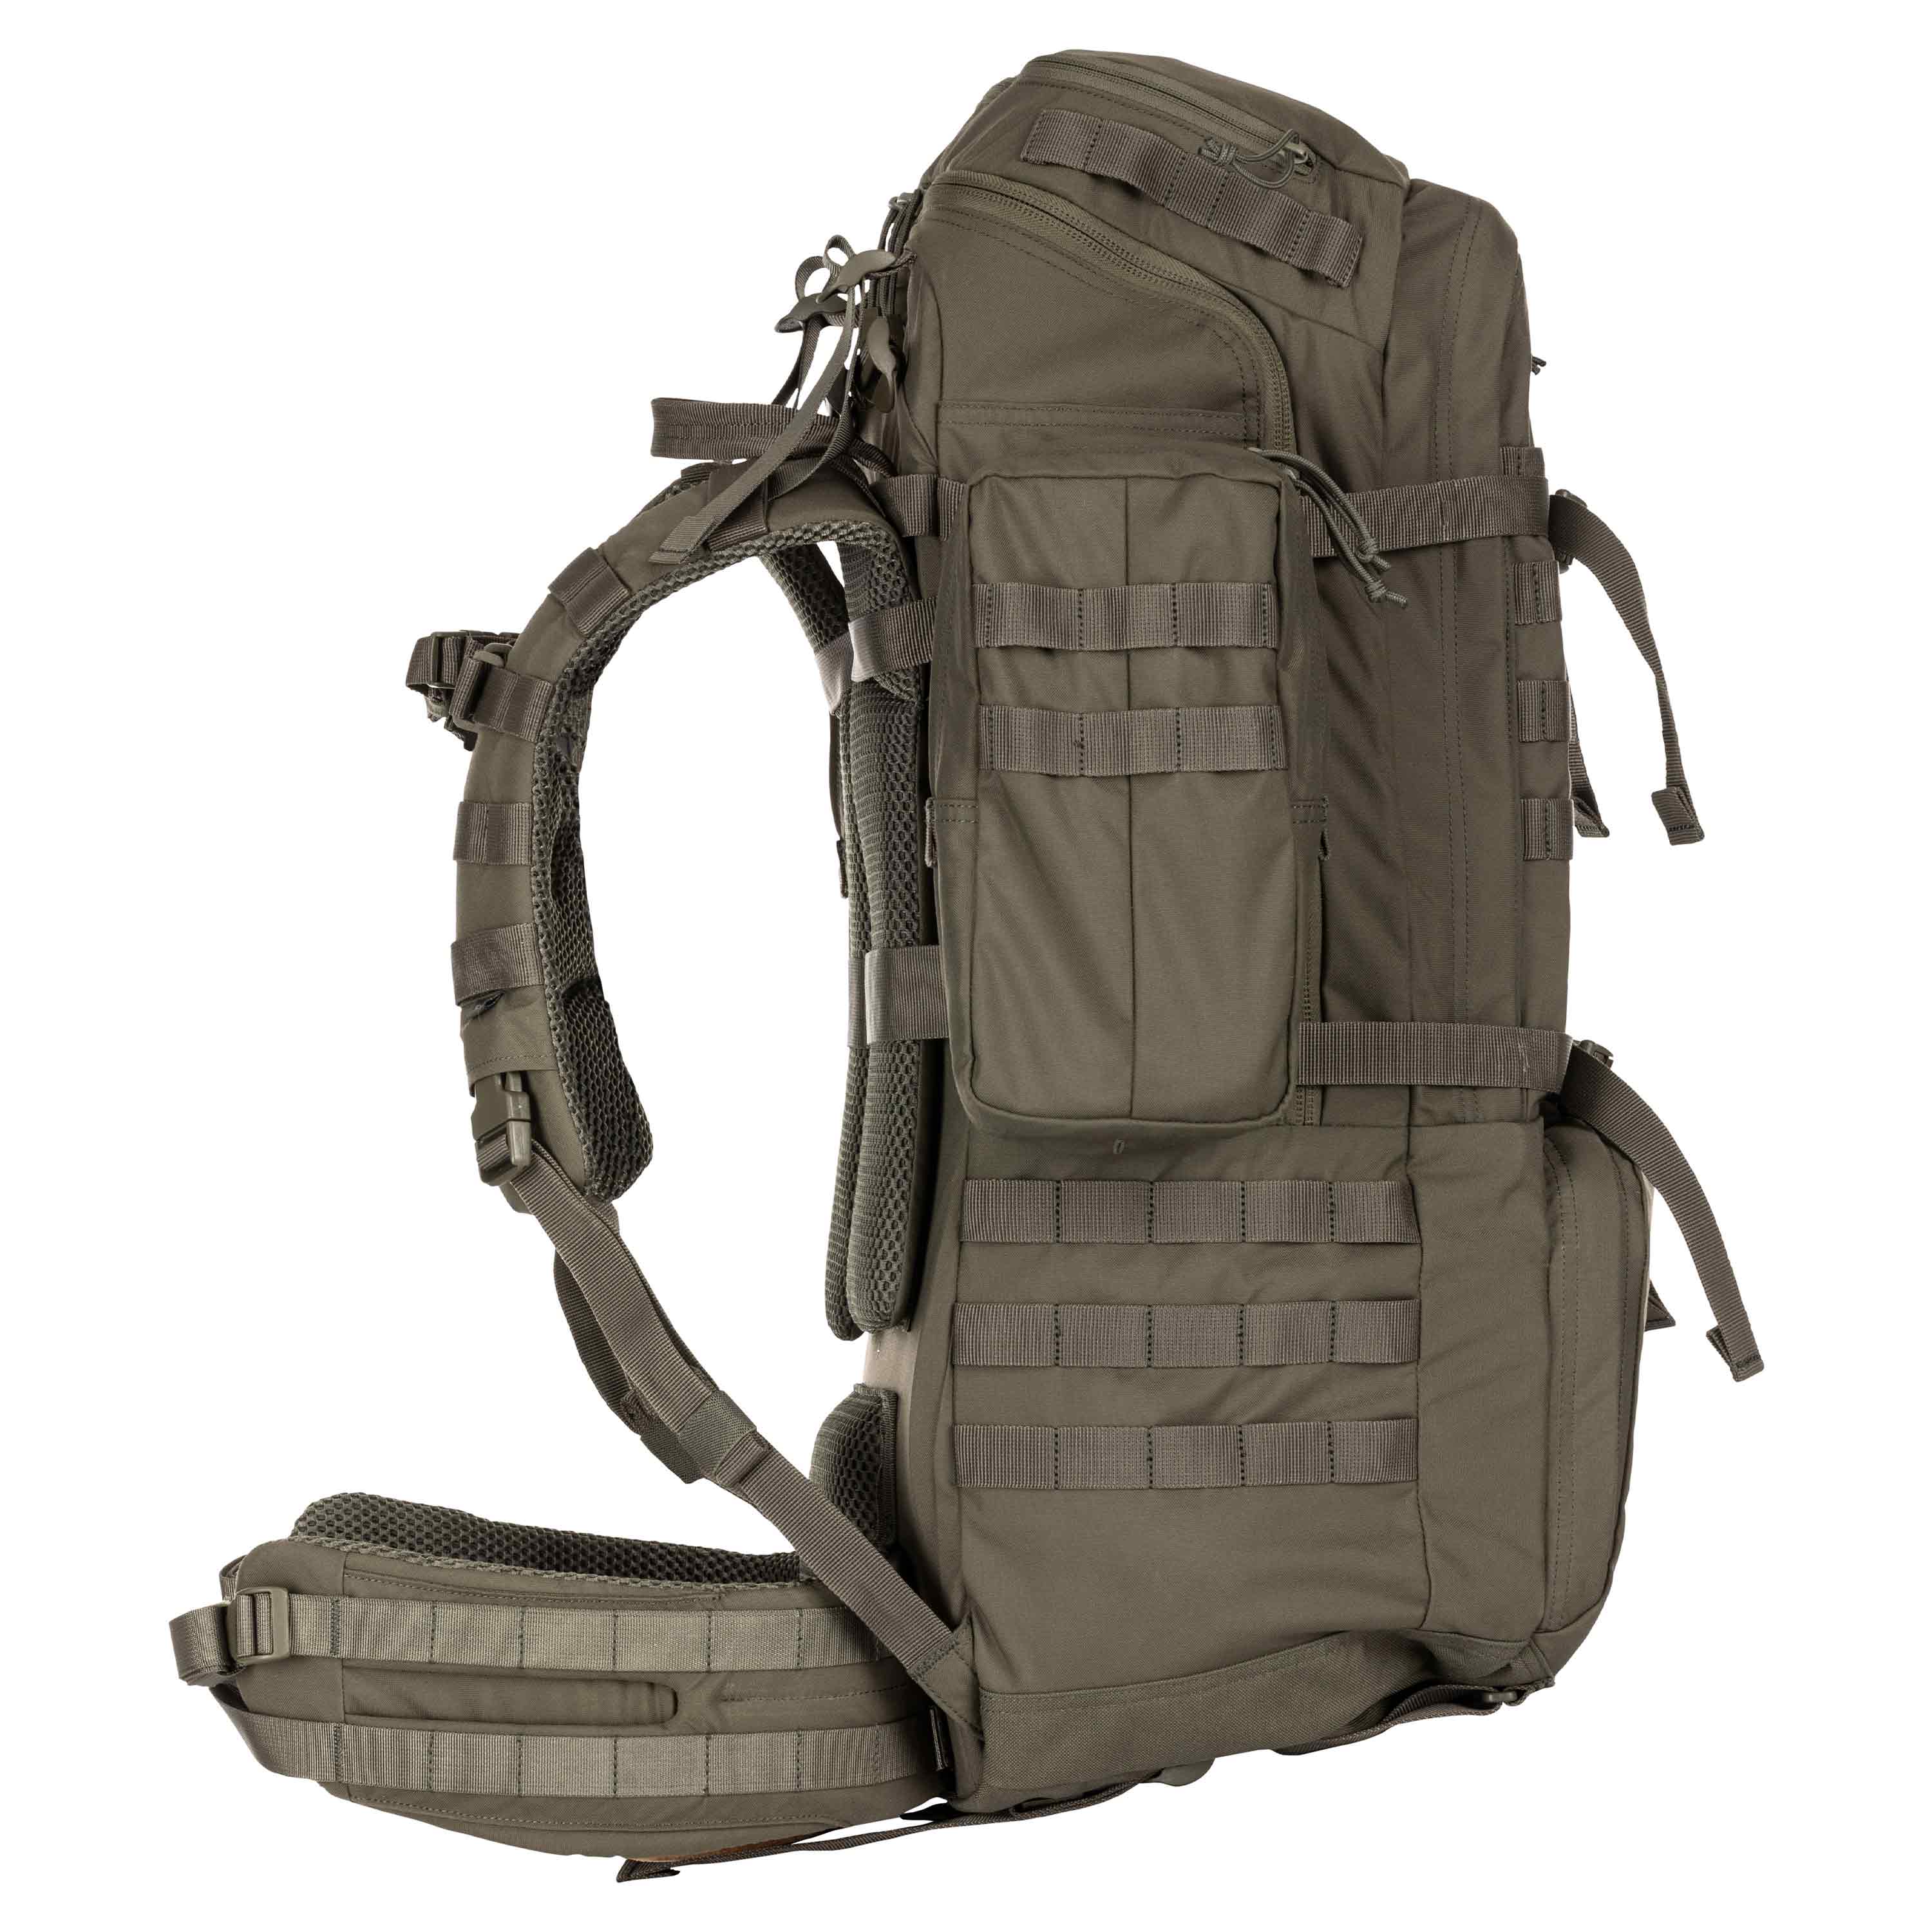 Purchase the 11 Backpack Rush 100 ranger green by ASMC